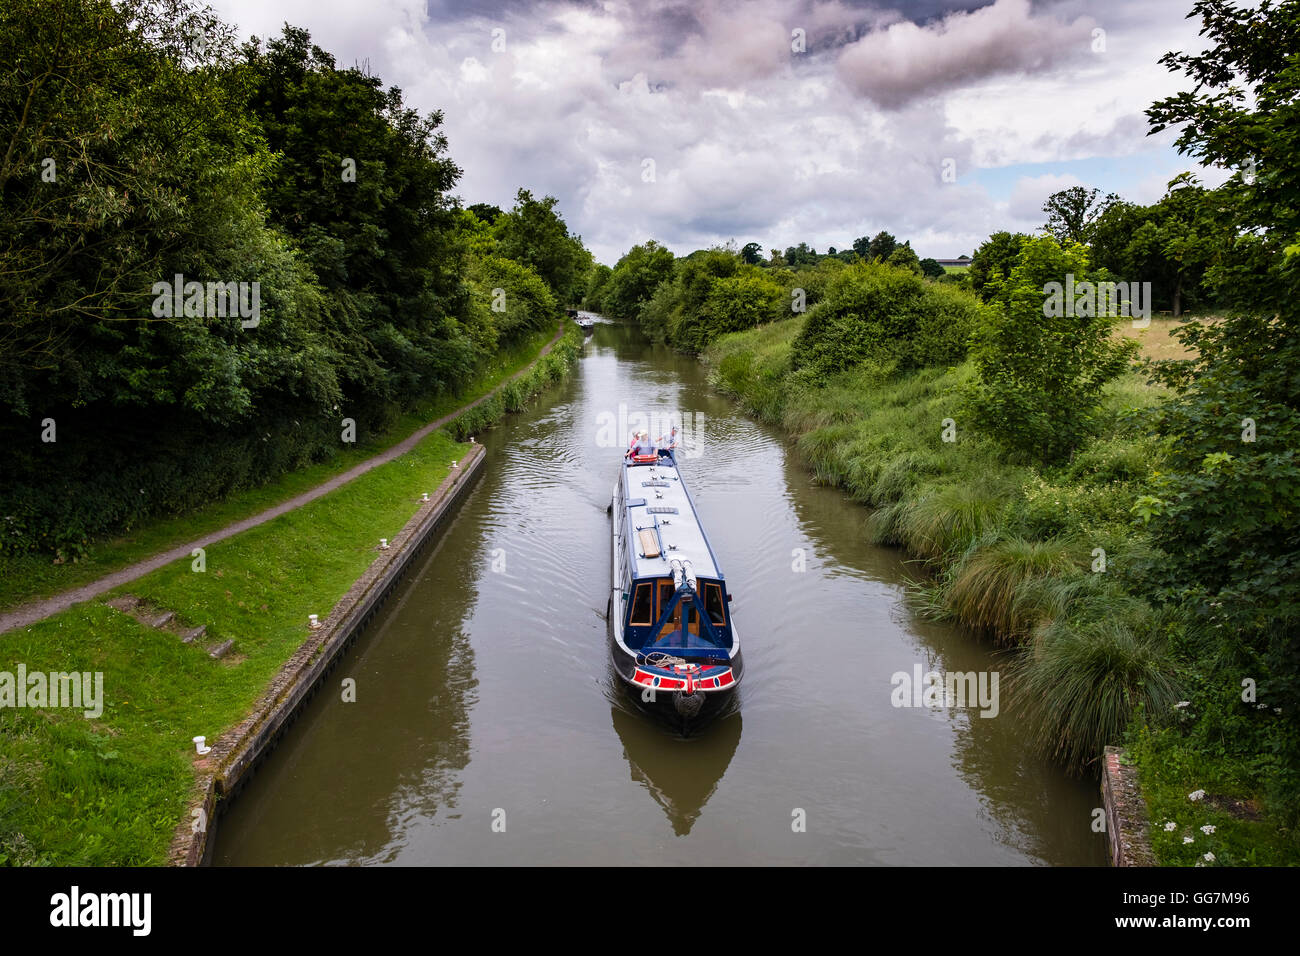 Narrow boat of Kennet and Avon Canal in Wiltshire England, United Kingdom Stock Photo